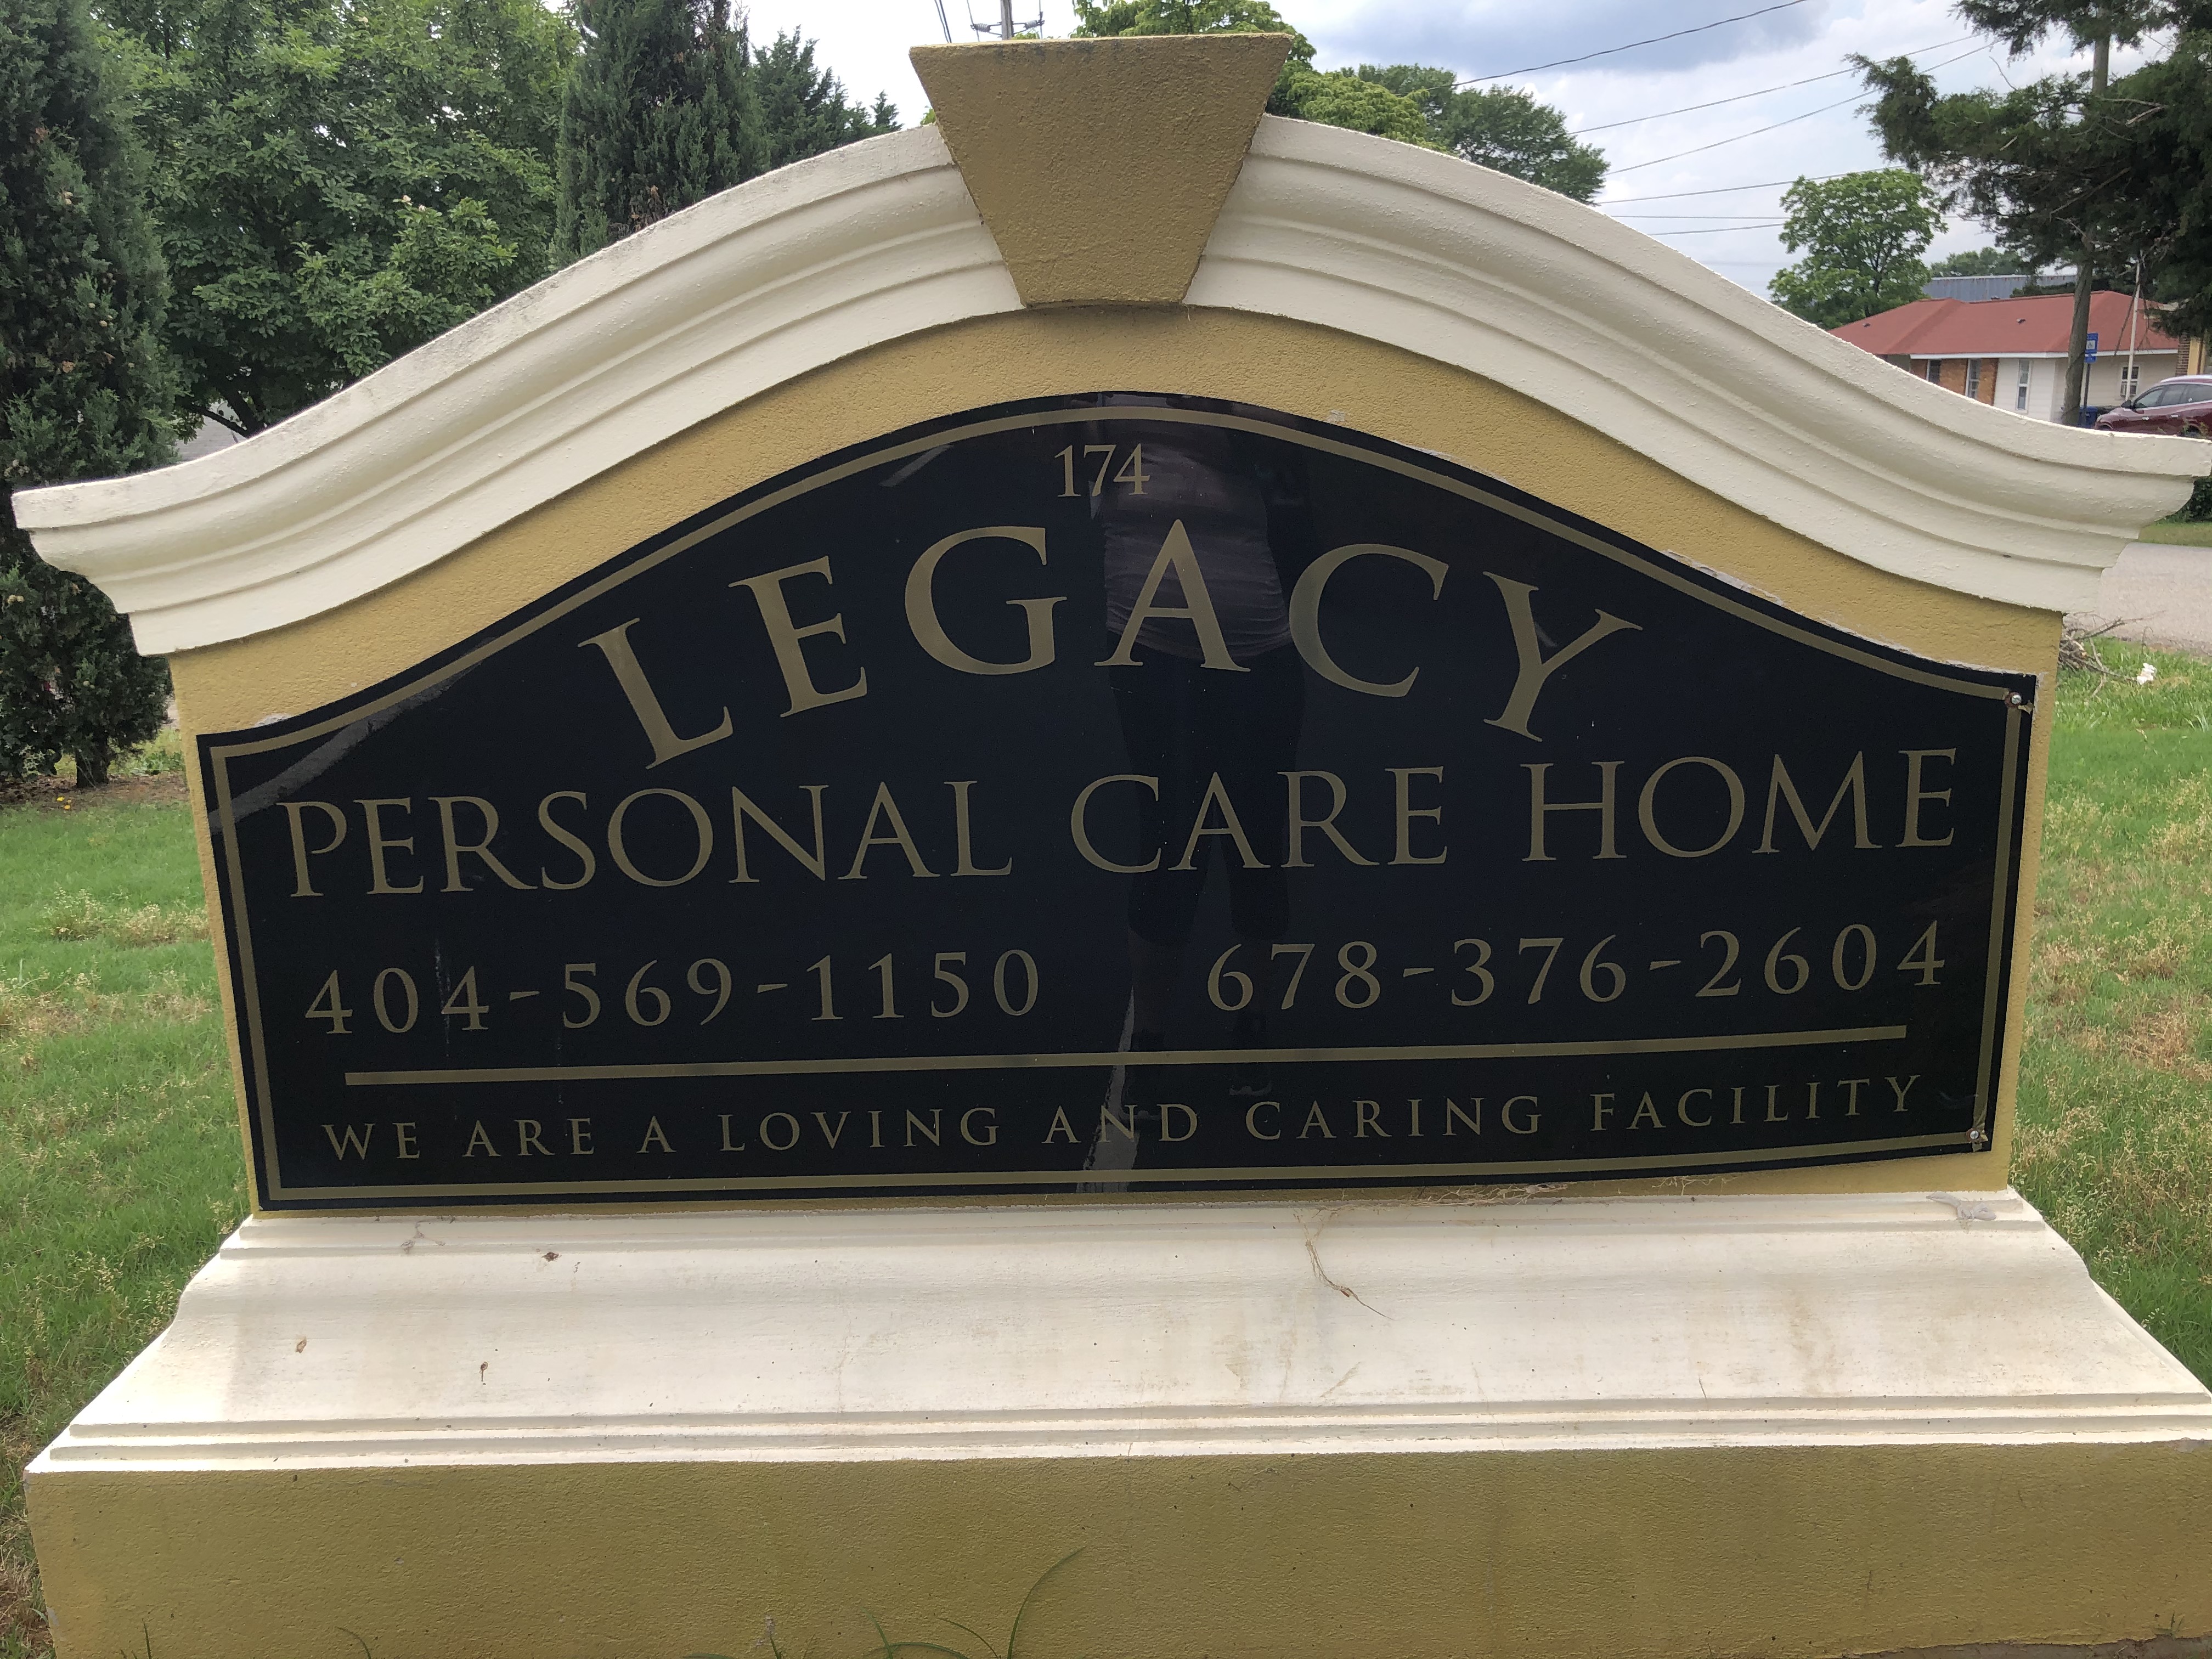 Legacy Personal Care Home image